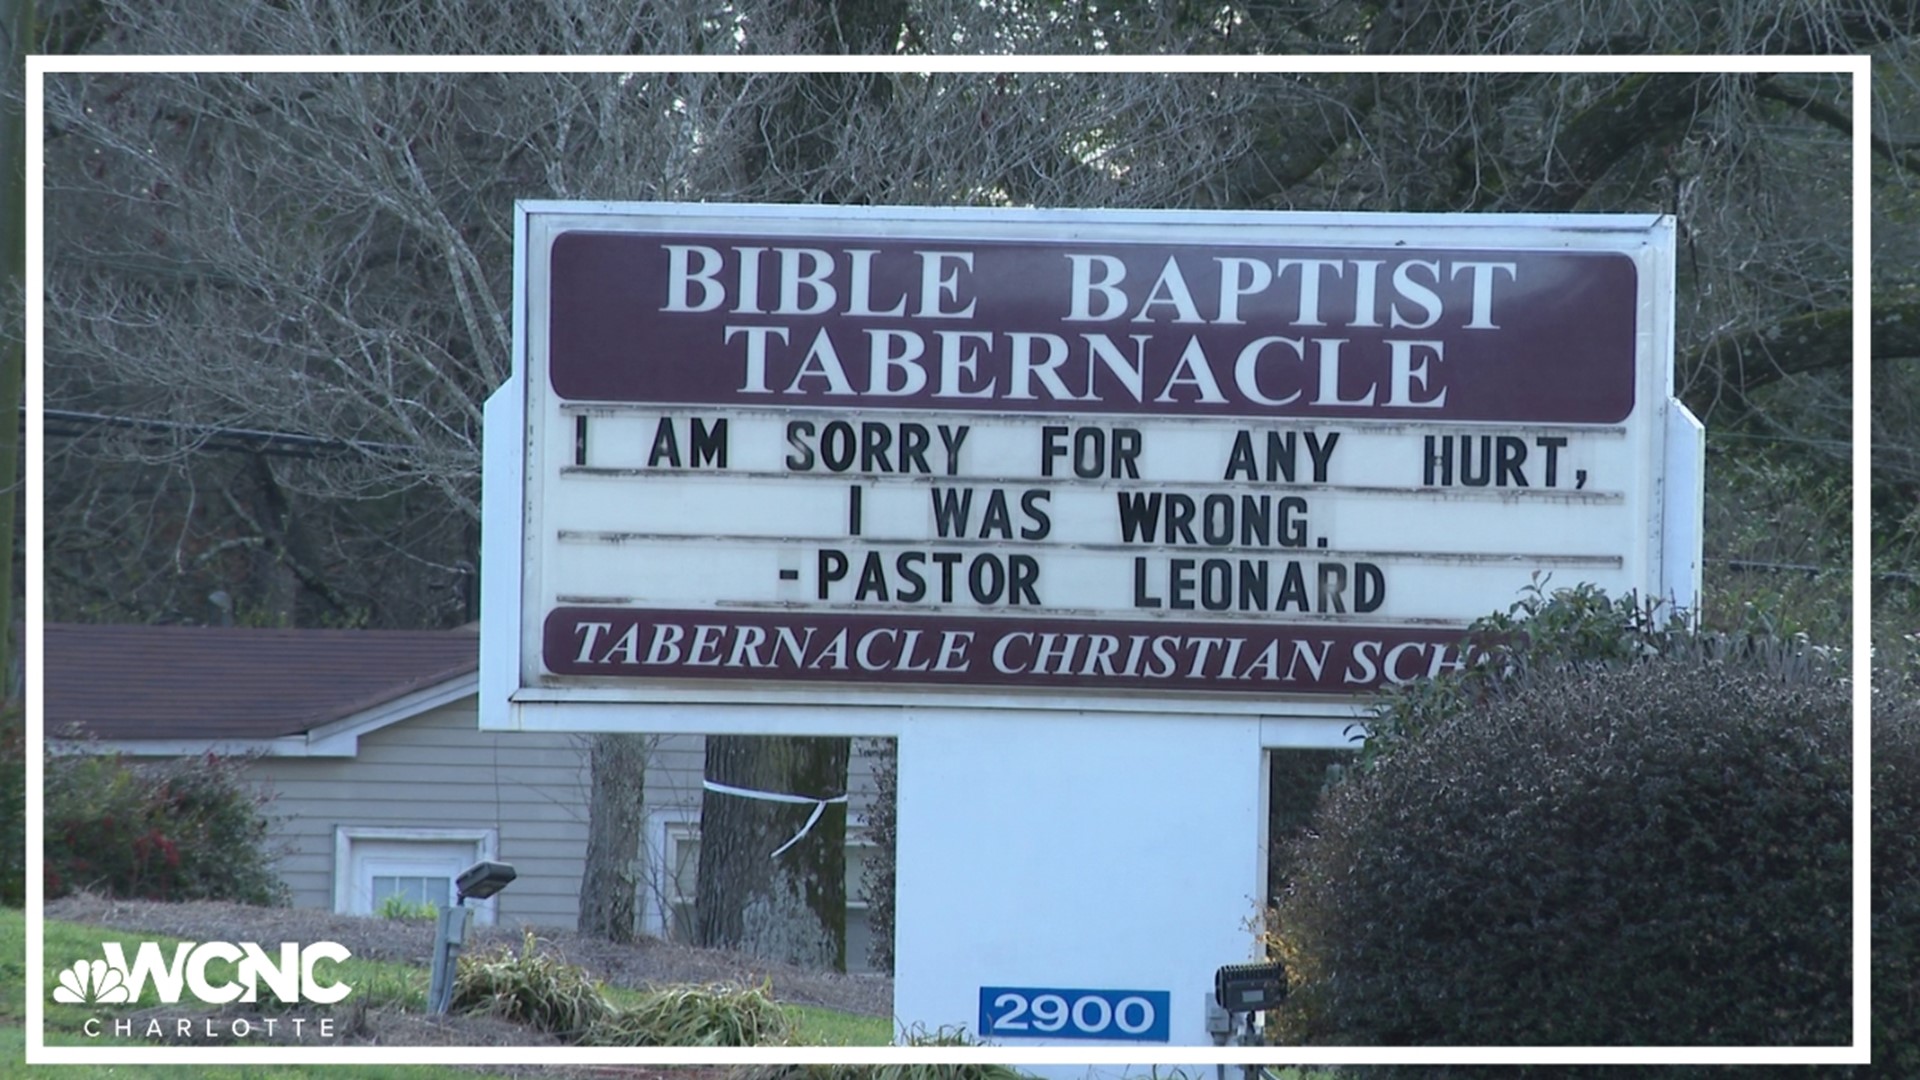 Pastor Bobby Leonard, who heads the Bible Baptist Tabernacle in Monroe, said he wouldn't vote to convict a man who's accused of raping a woman if she wore shorts.